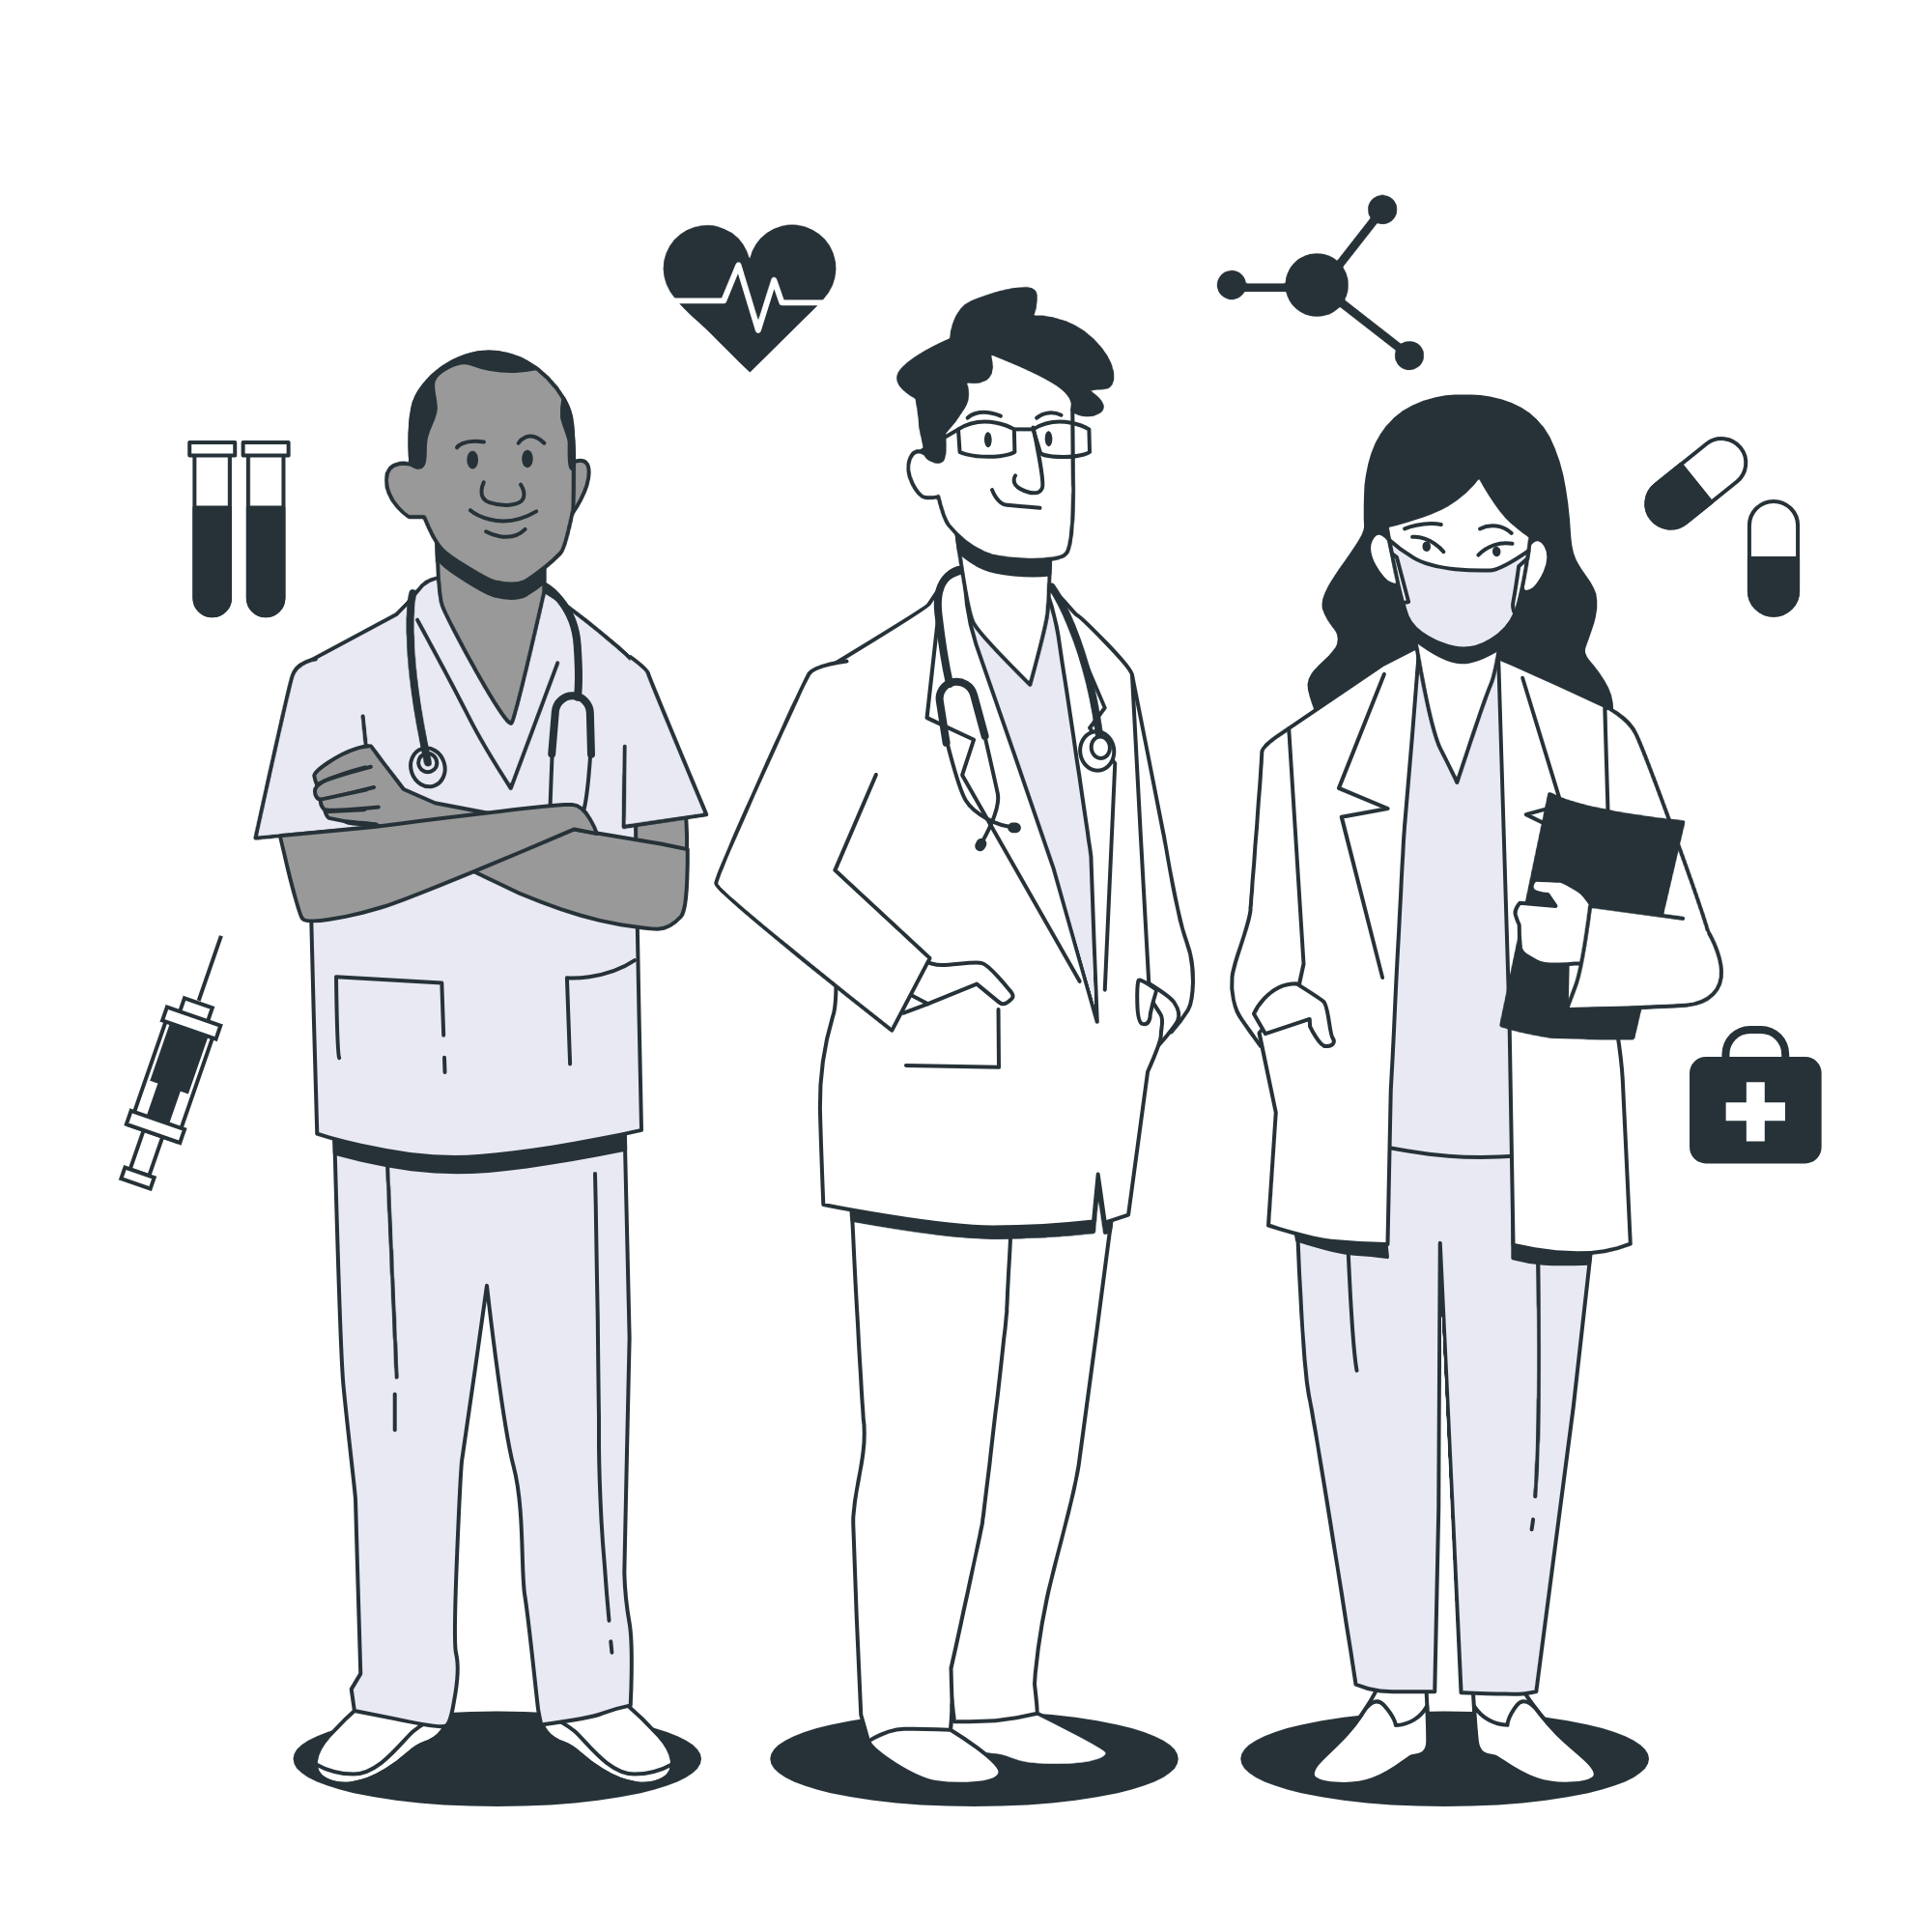 Image illustrating home care services: Depicts personalized support provided social worker, doctor and caretaker within the comfort of one's home, promoting independence and well-being